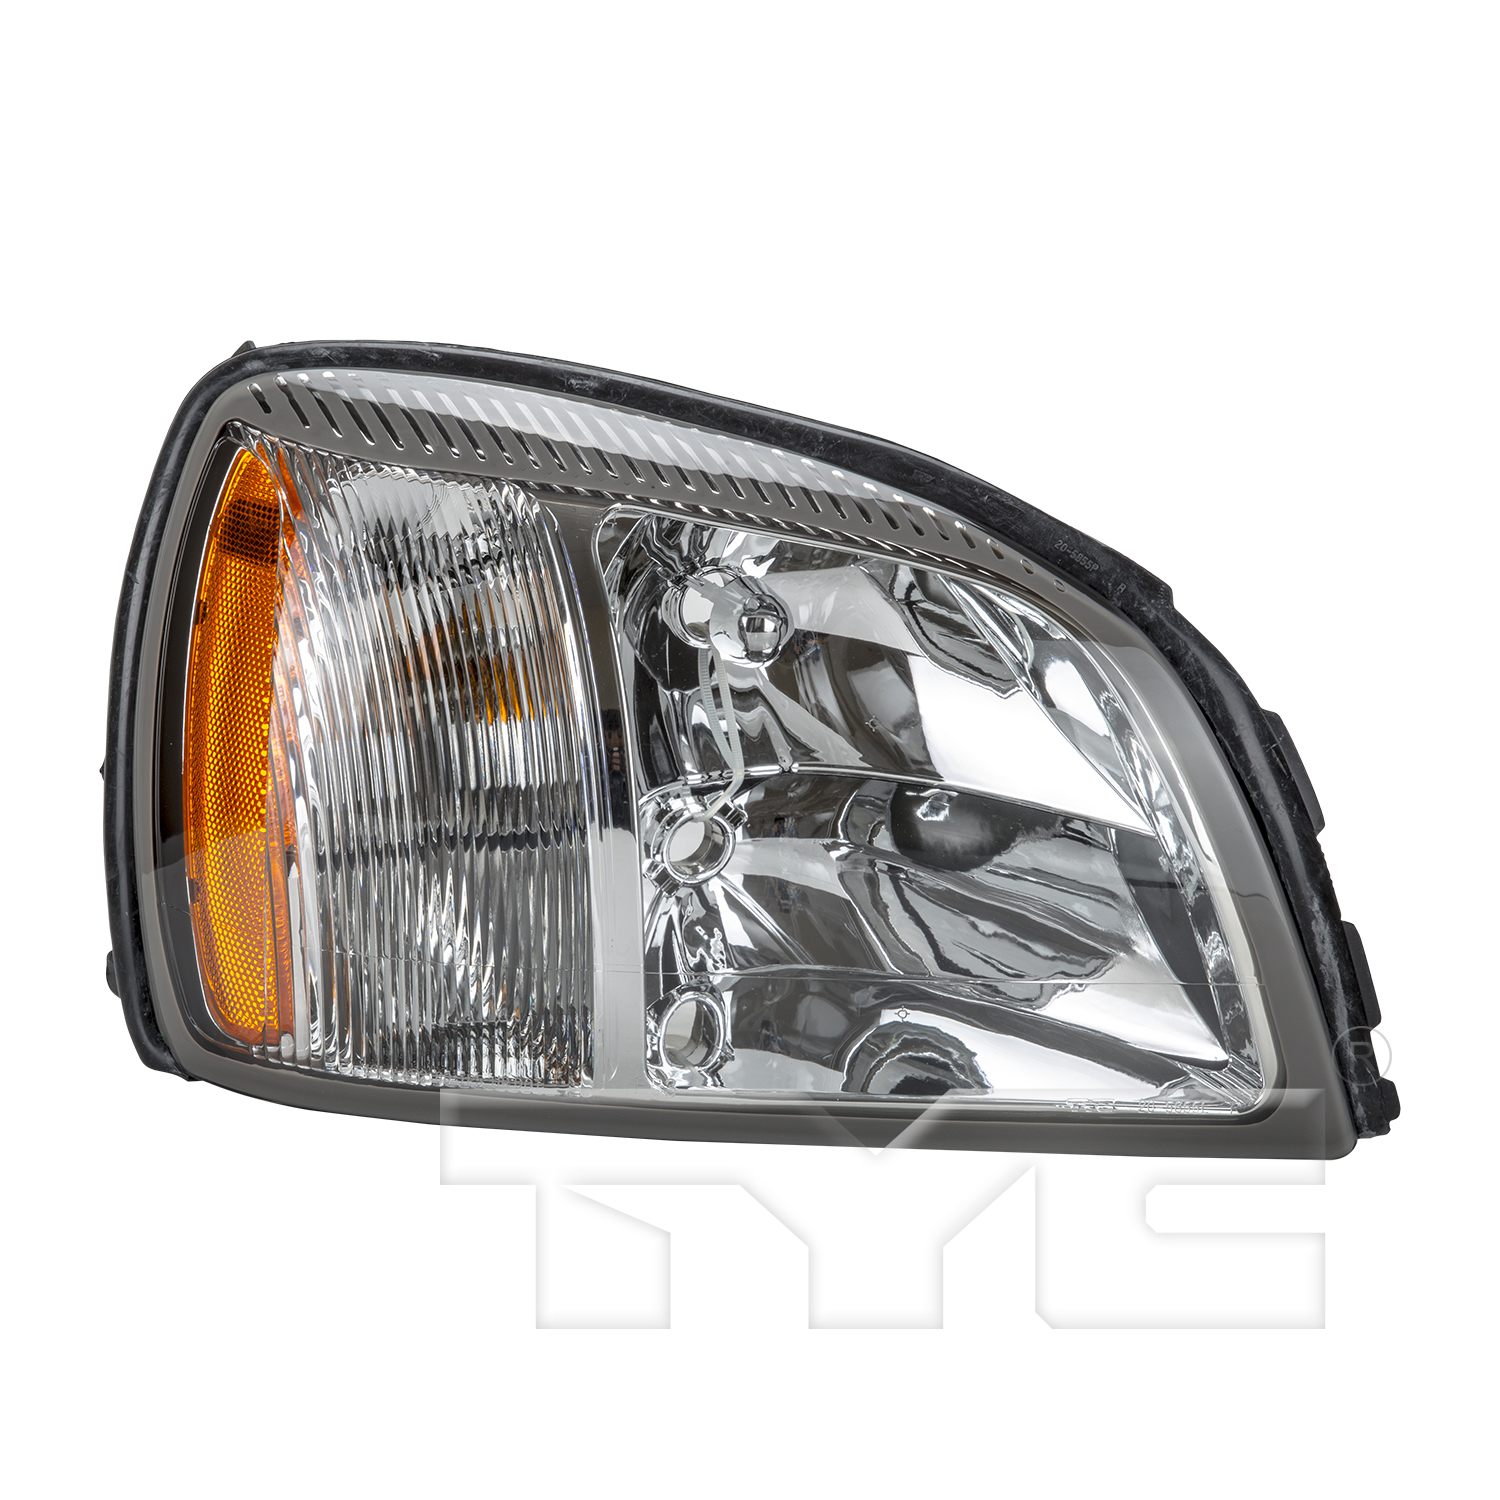 Aftermarket HEADLIGHTS for CADILLAC - DEVILLE, DEVILLE,04-05,RT Headlamp assy composite